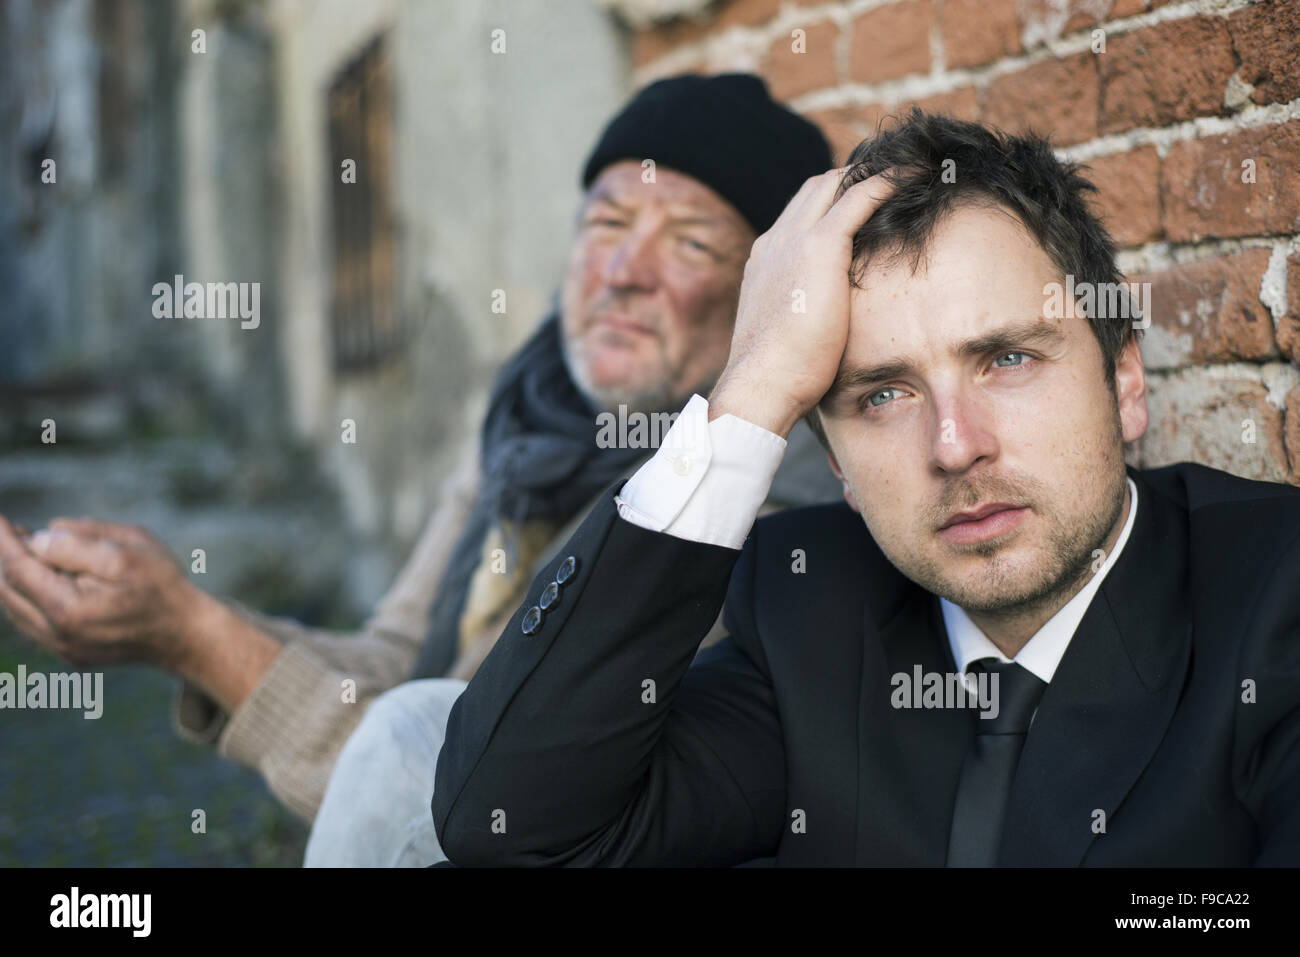 Jobless manager is on the street. Stock Photo